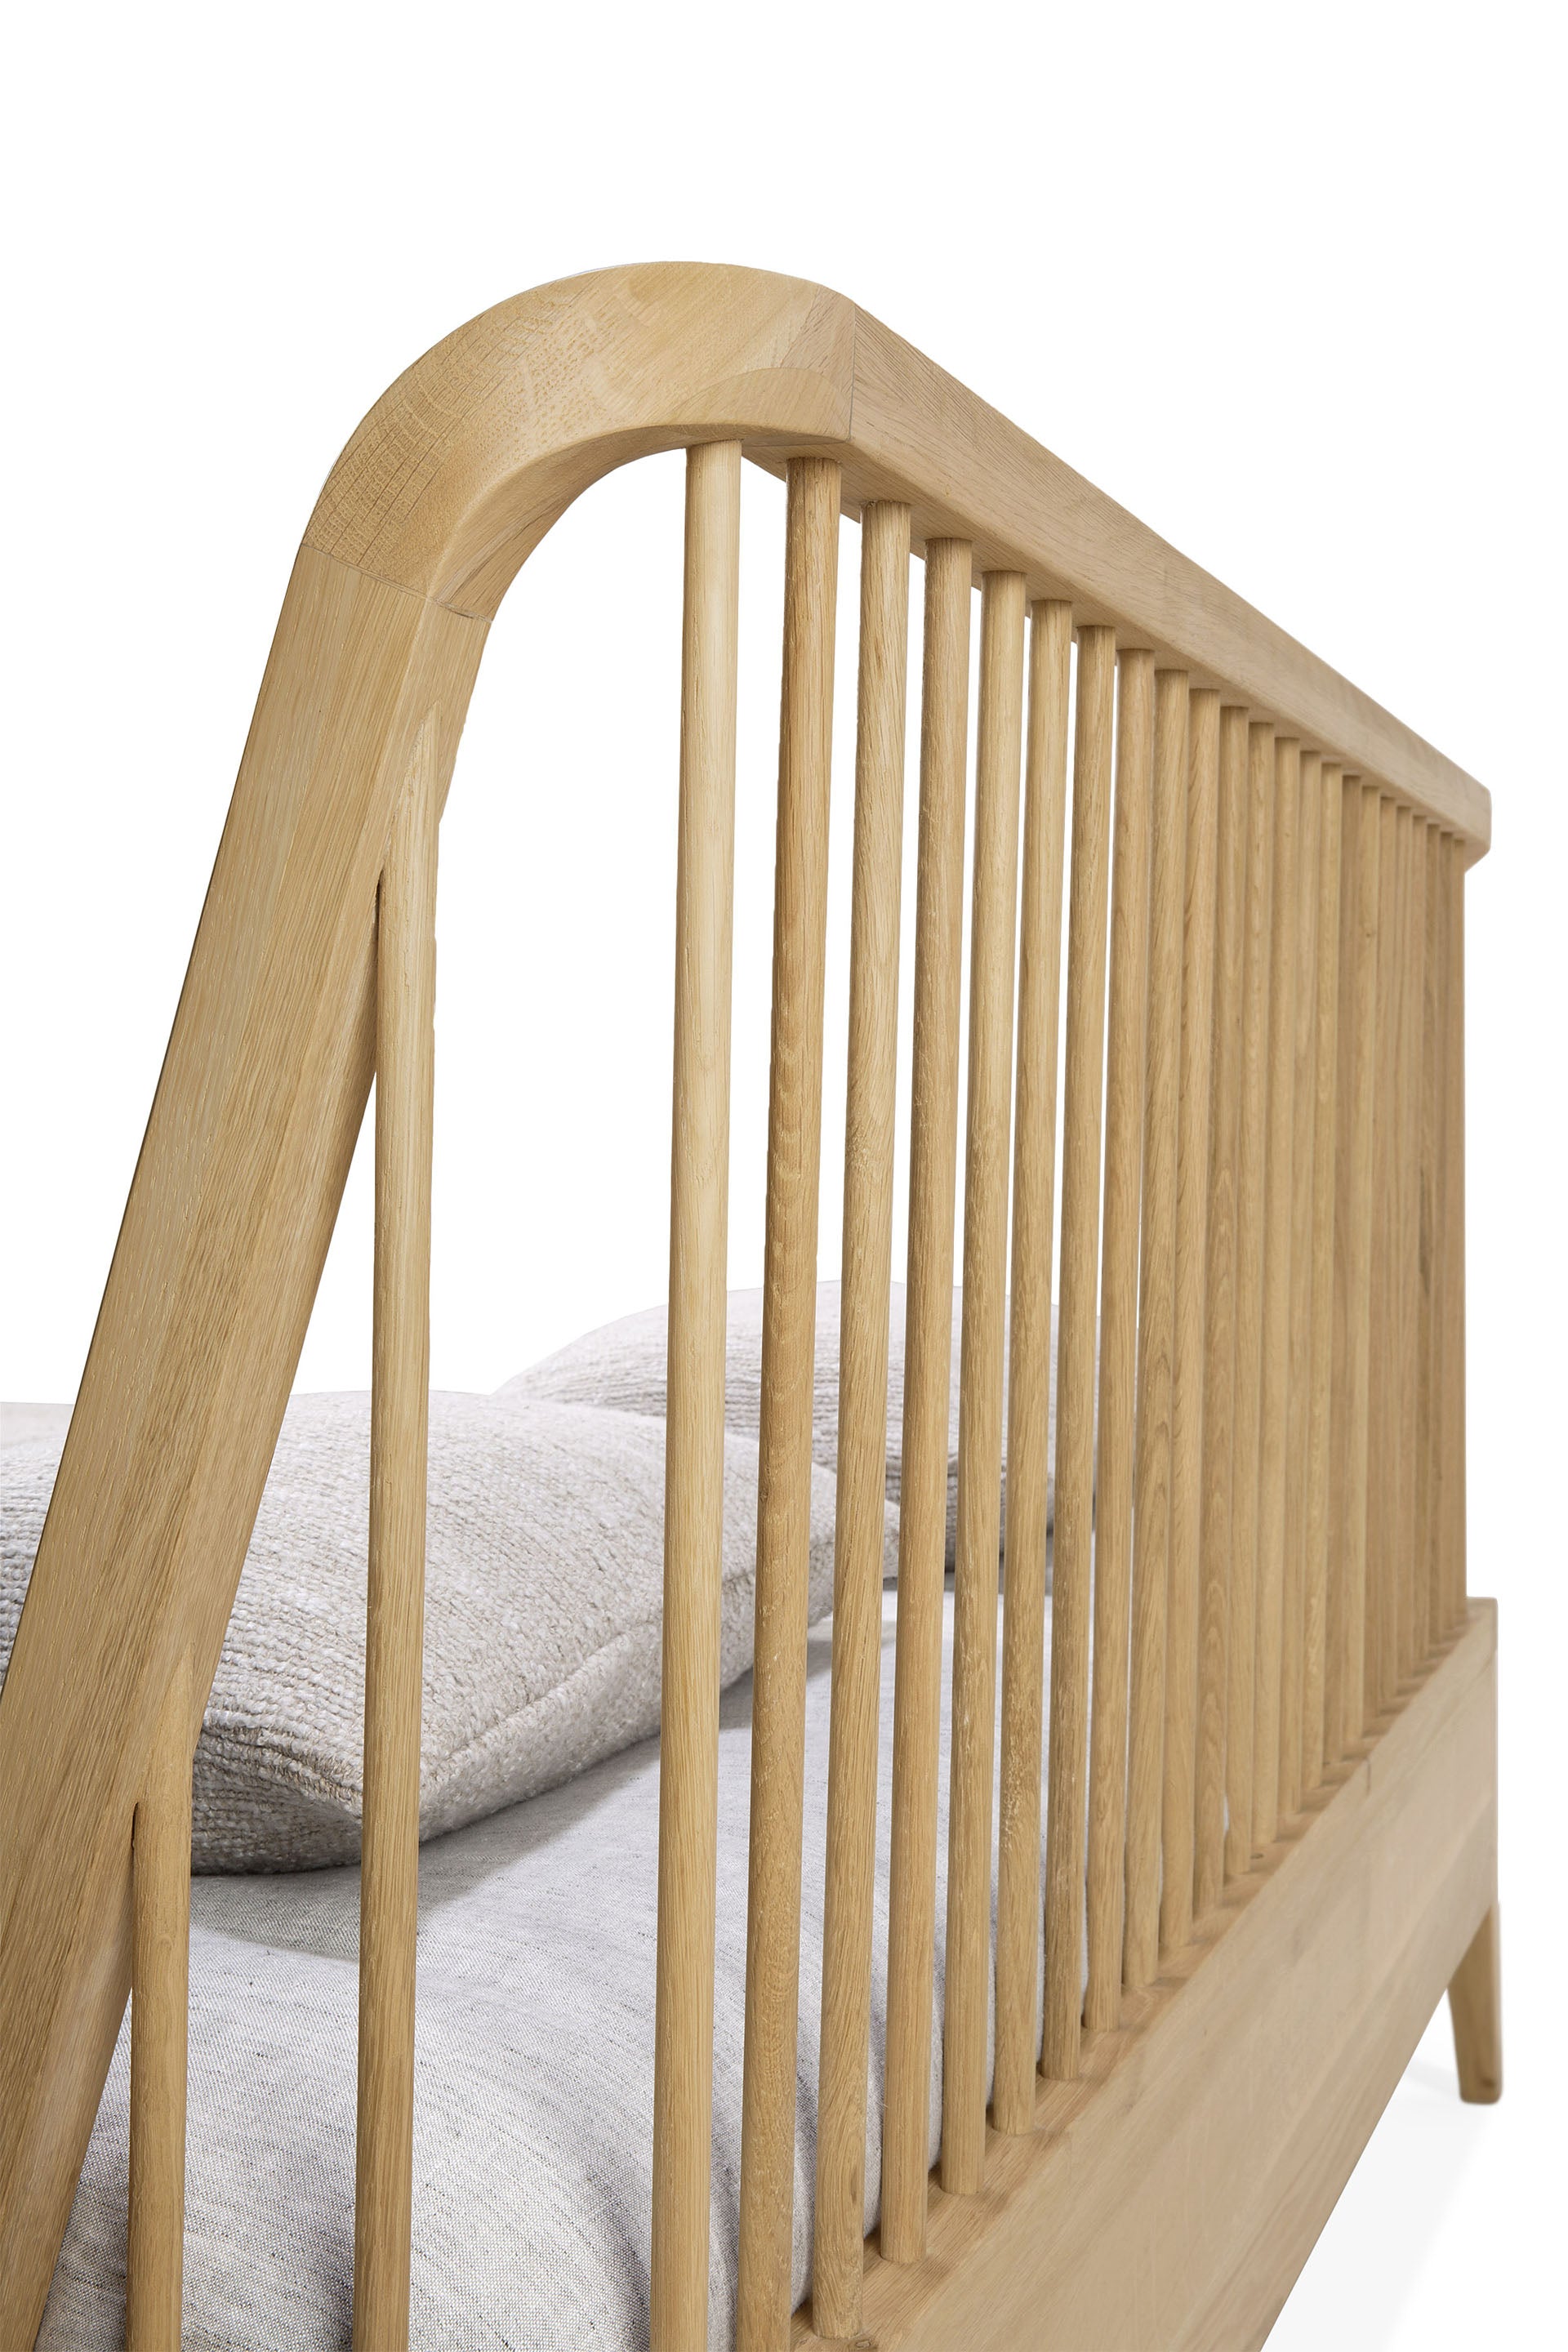 Ethnicraft Oak Spindle Bed is available from Make Your House A Home, Bendigo, Victoria, Australia